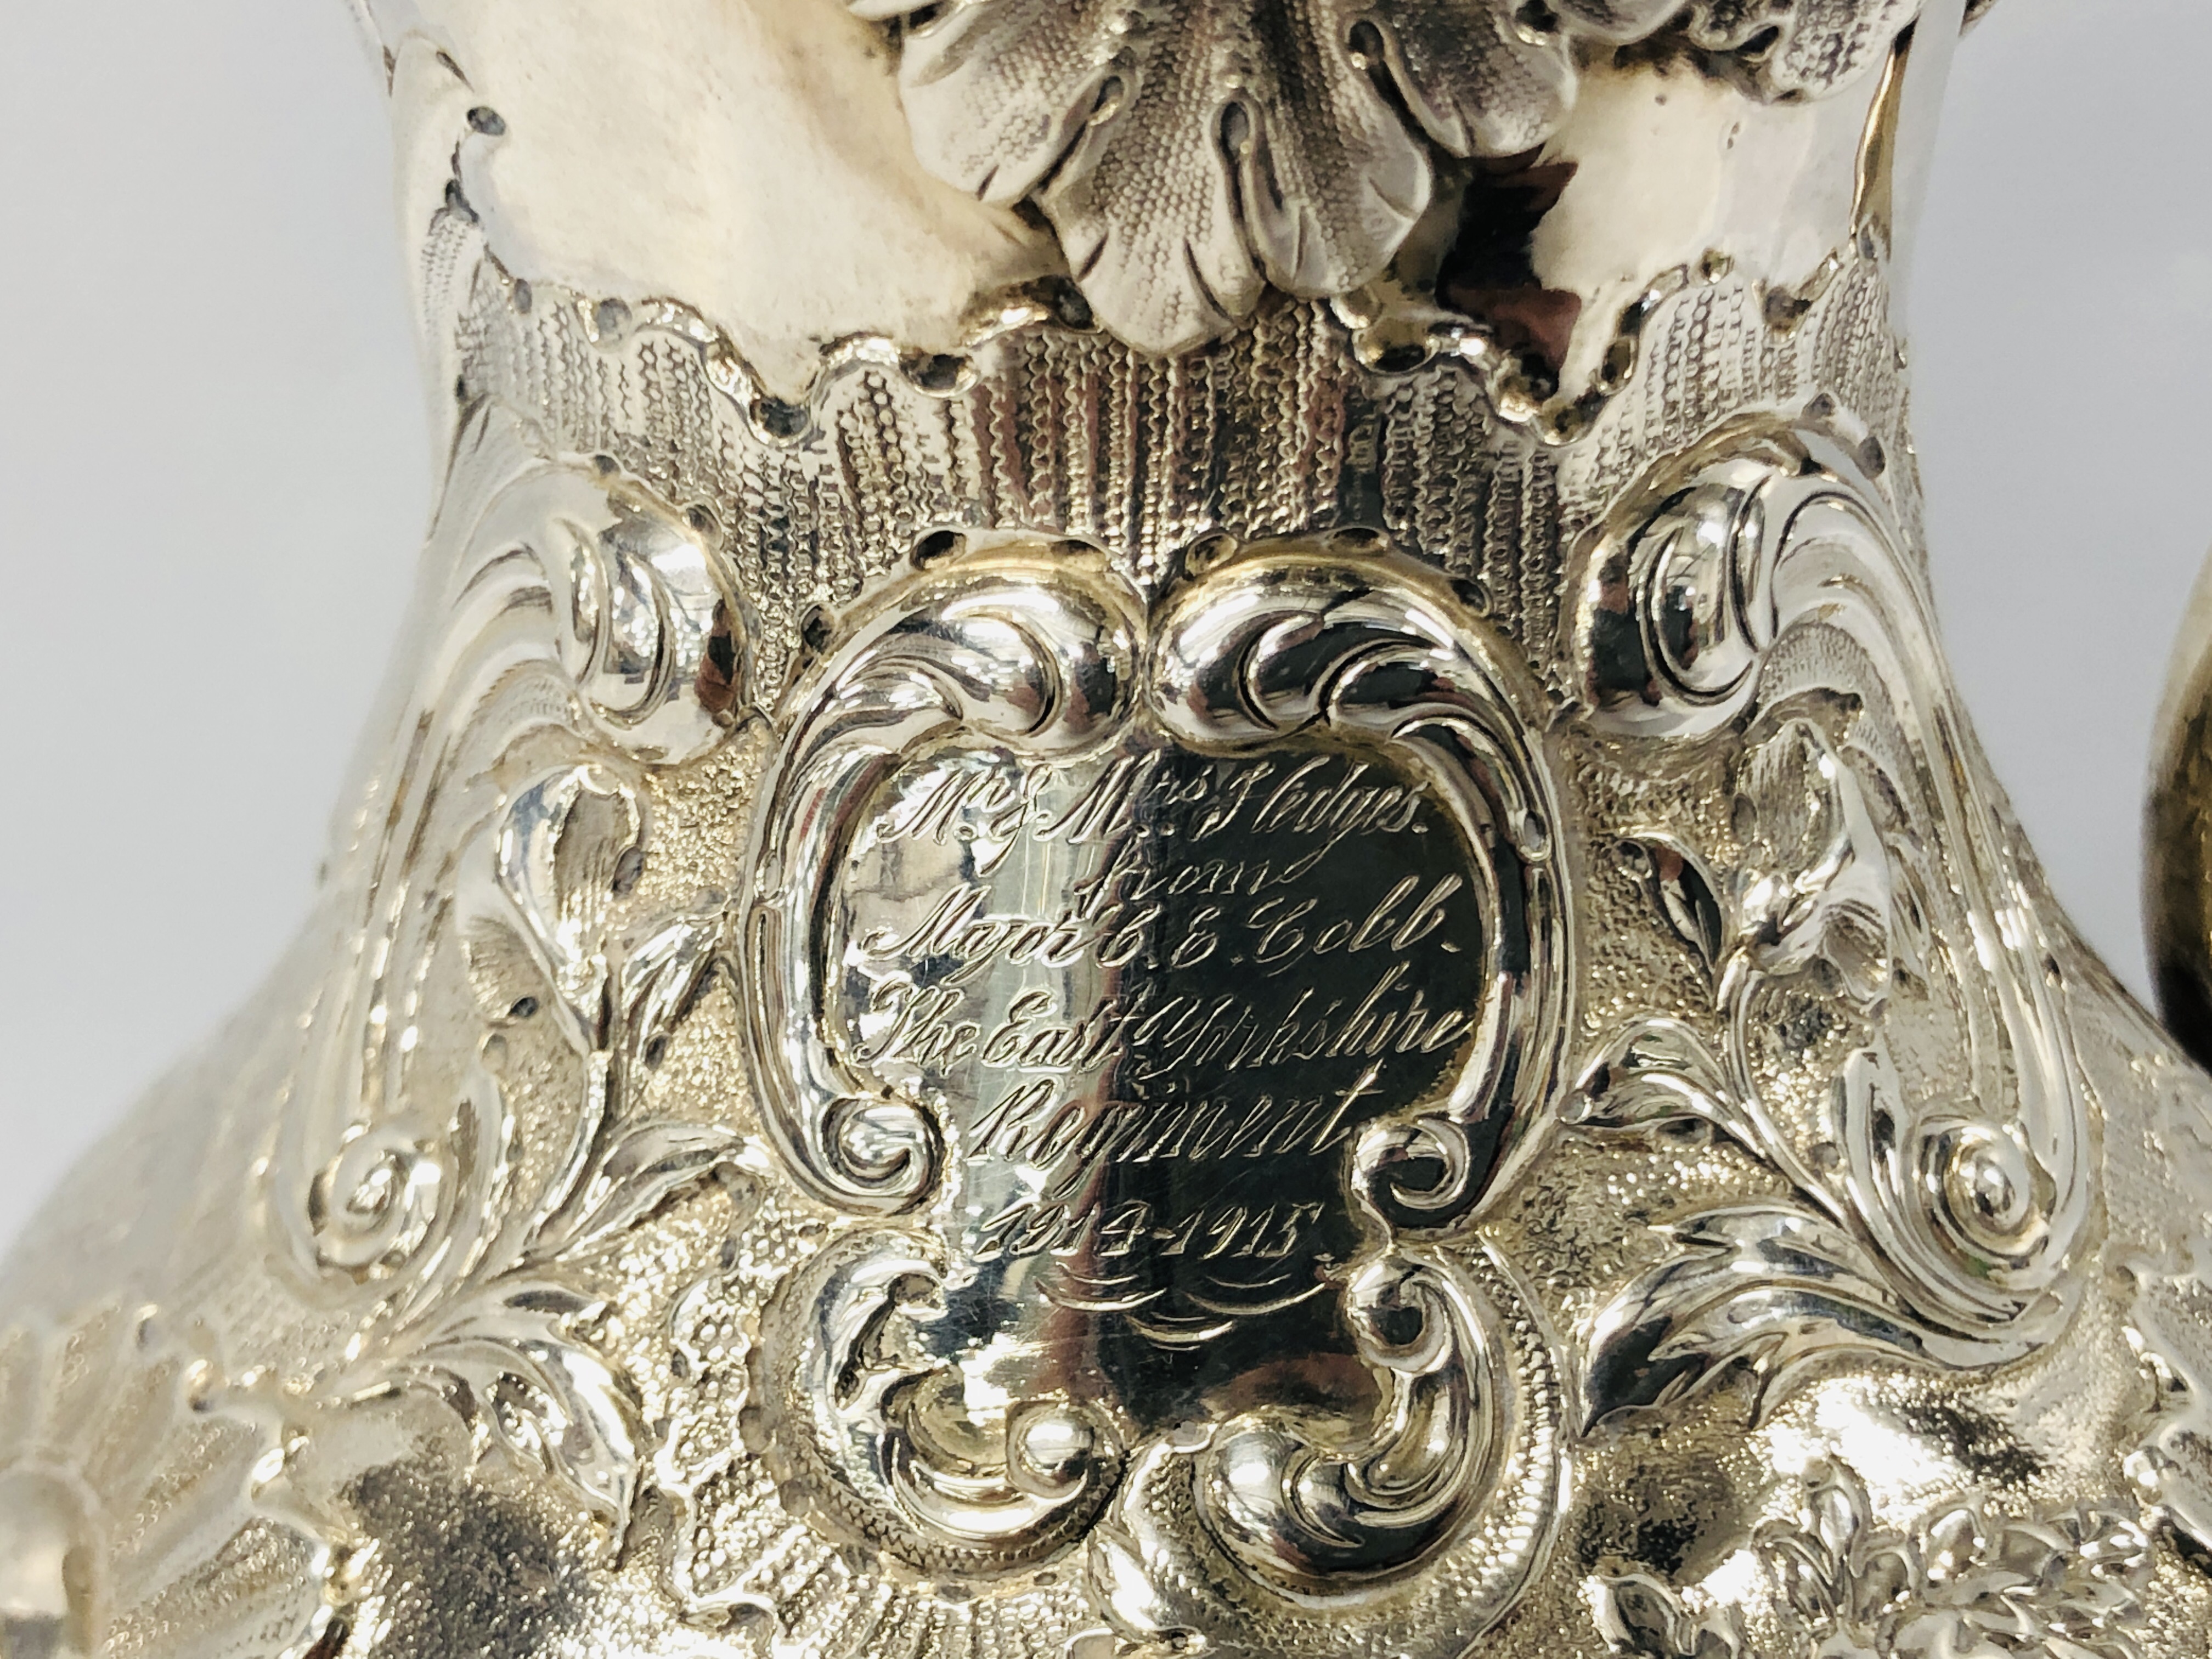 A SILVER MILK JUG OF ROCOCO DESIGN DECORATED WITH CHINOISERIE FIGURES WITH INSCRIPTION MR AND MRS J. - Image 2 of 25